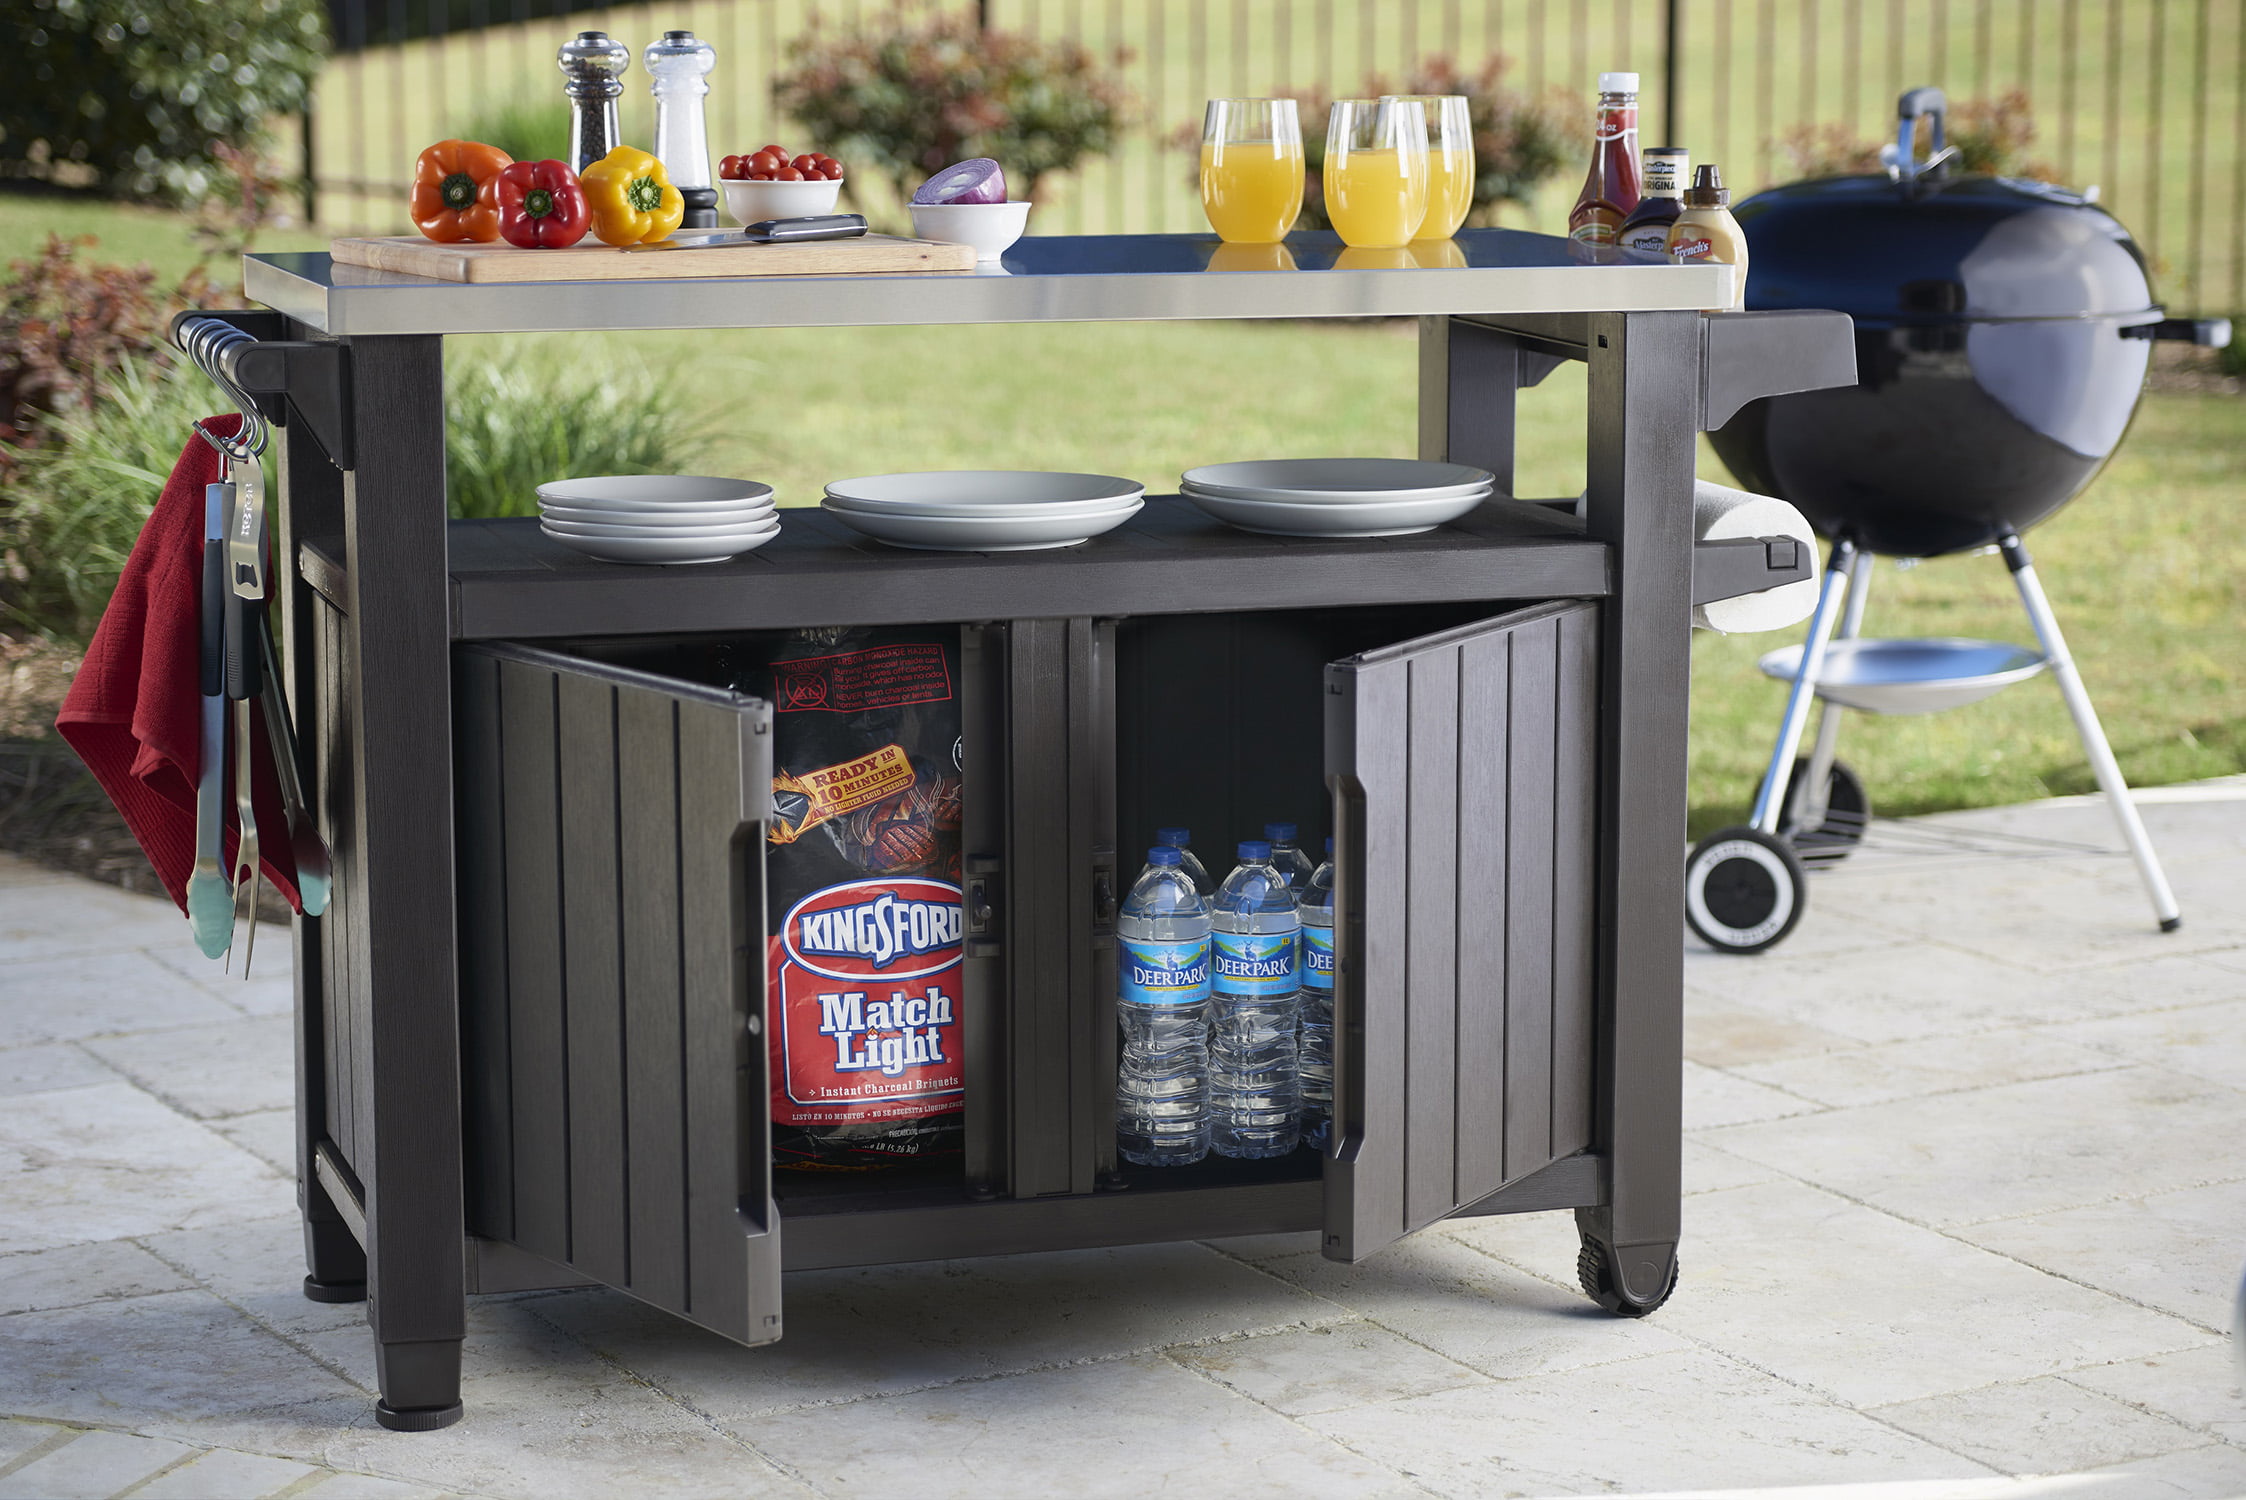 Keter Unity Xl Portable Outdoor Table And Storage Cabinet With Accessory Hooks Espresso Brown Walmart Com Walmart Com